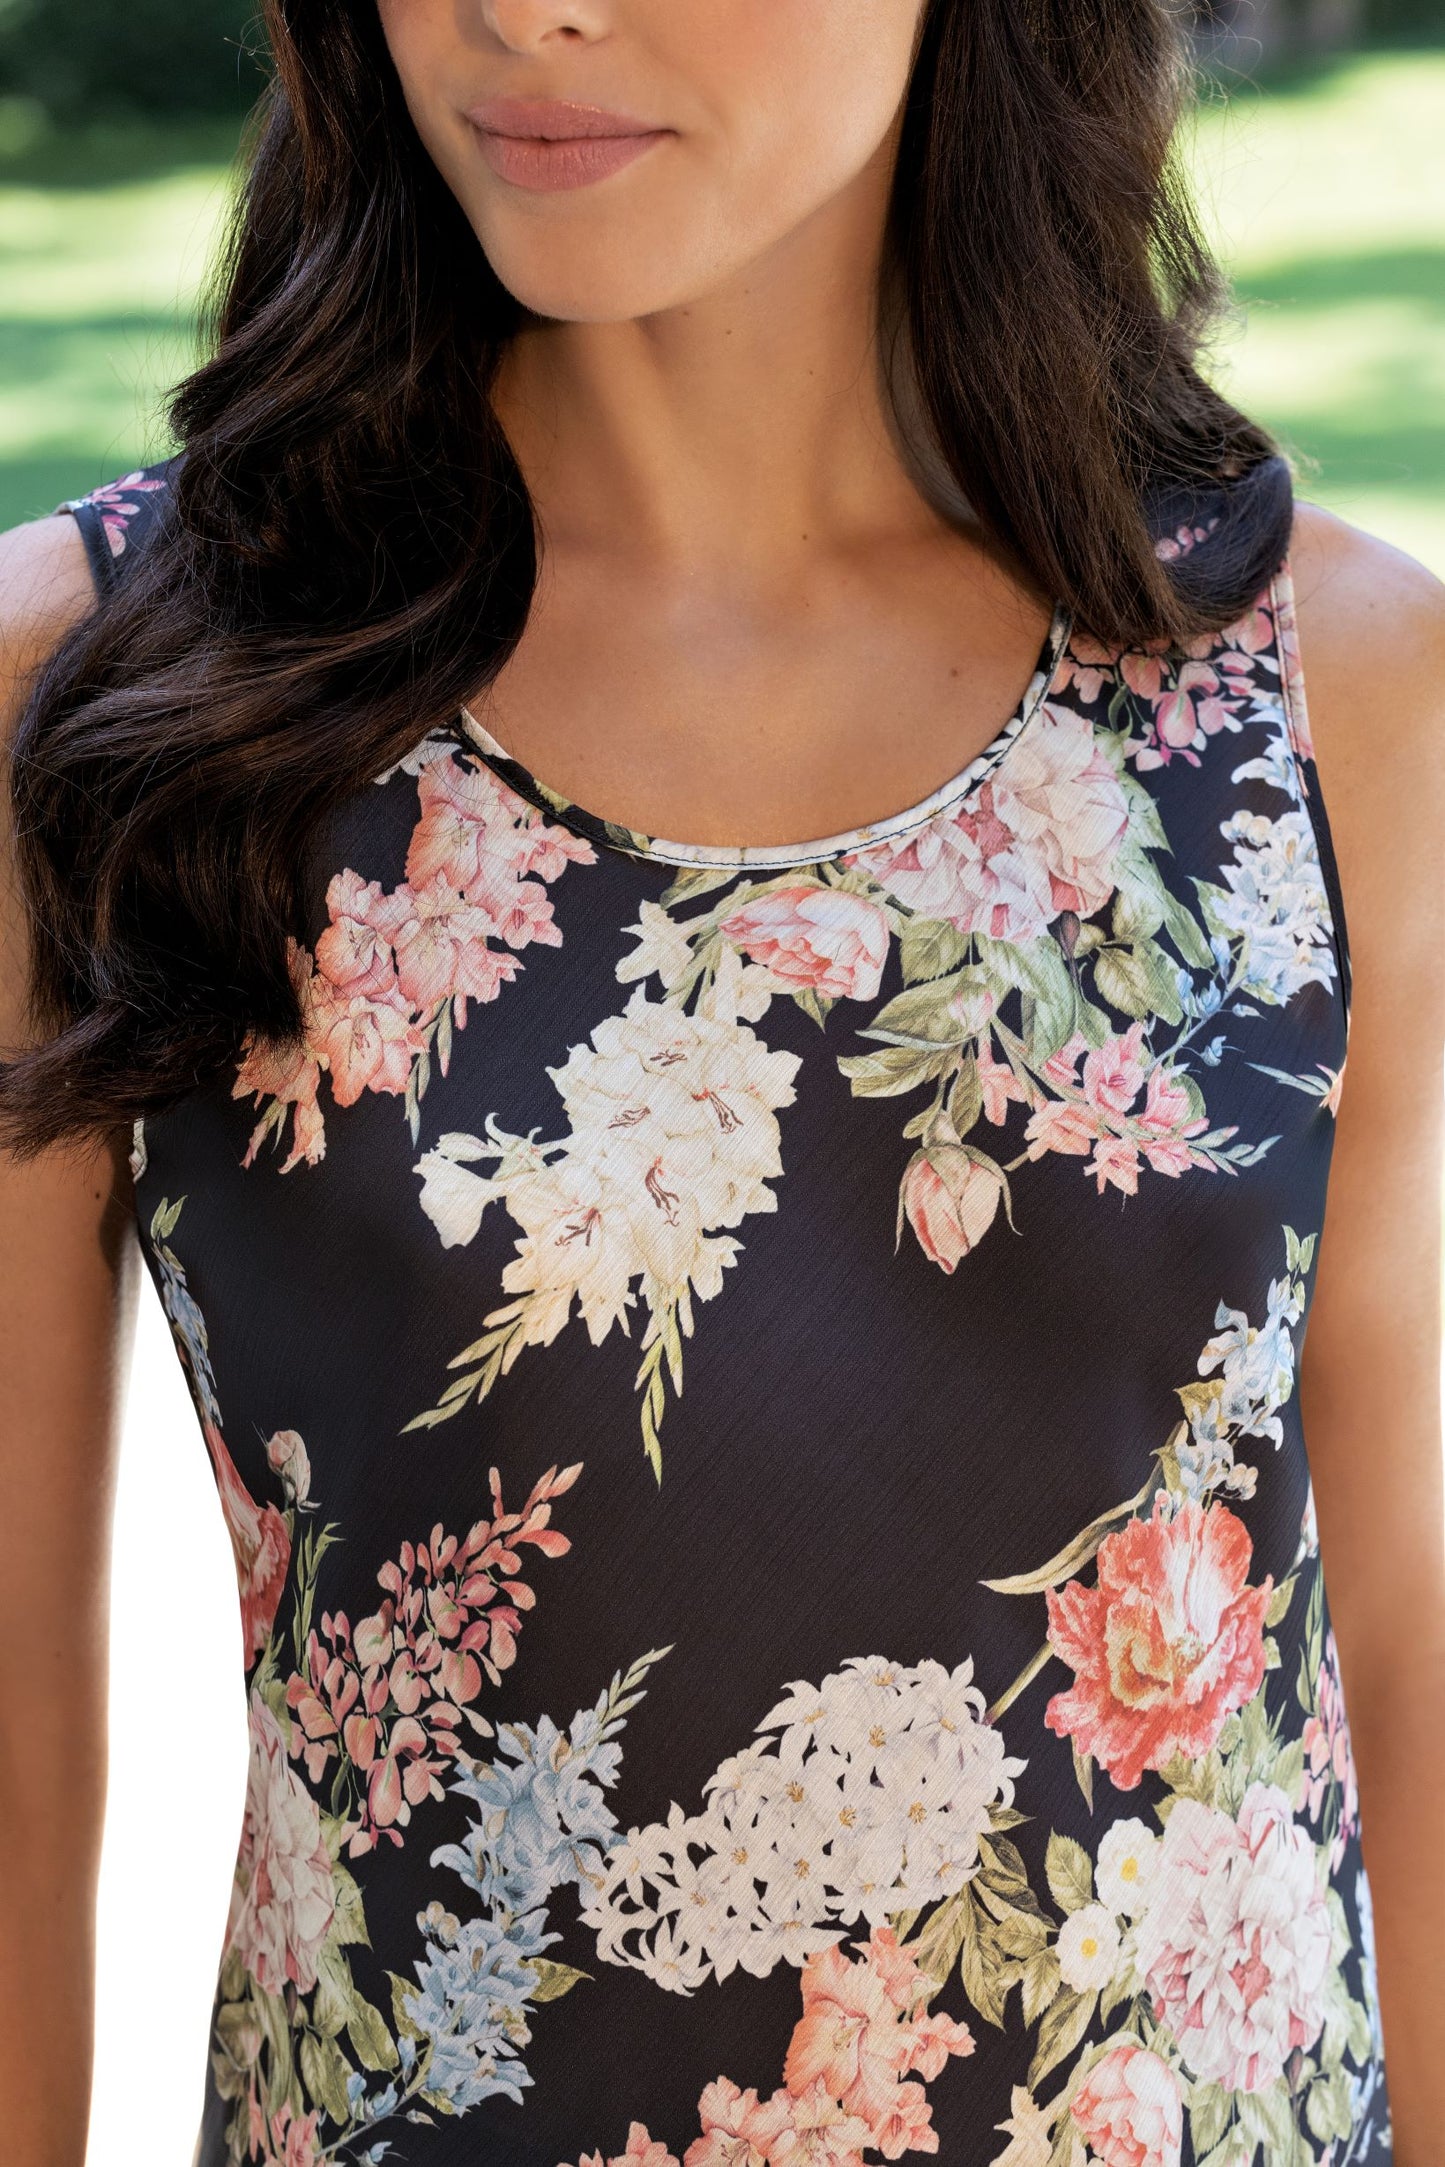 This top is inspired by the gardens of Positano in Italy and provides a comfortable fit and sophisticated aesthetic. Its floral detailing and subtle colors create a unique look while its silky fabric ensures trustworthy quality. This versatile garment is suitable for wear as an outfit top, sleepwear, or loungewear.